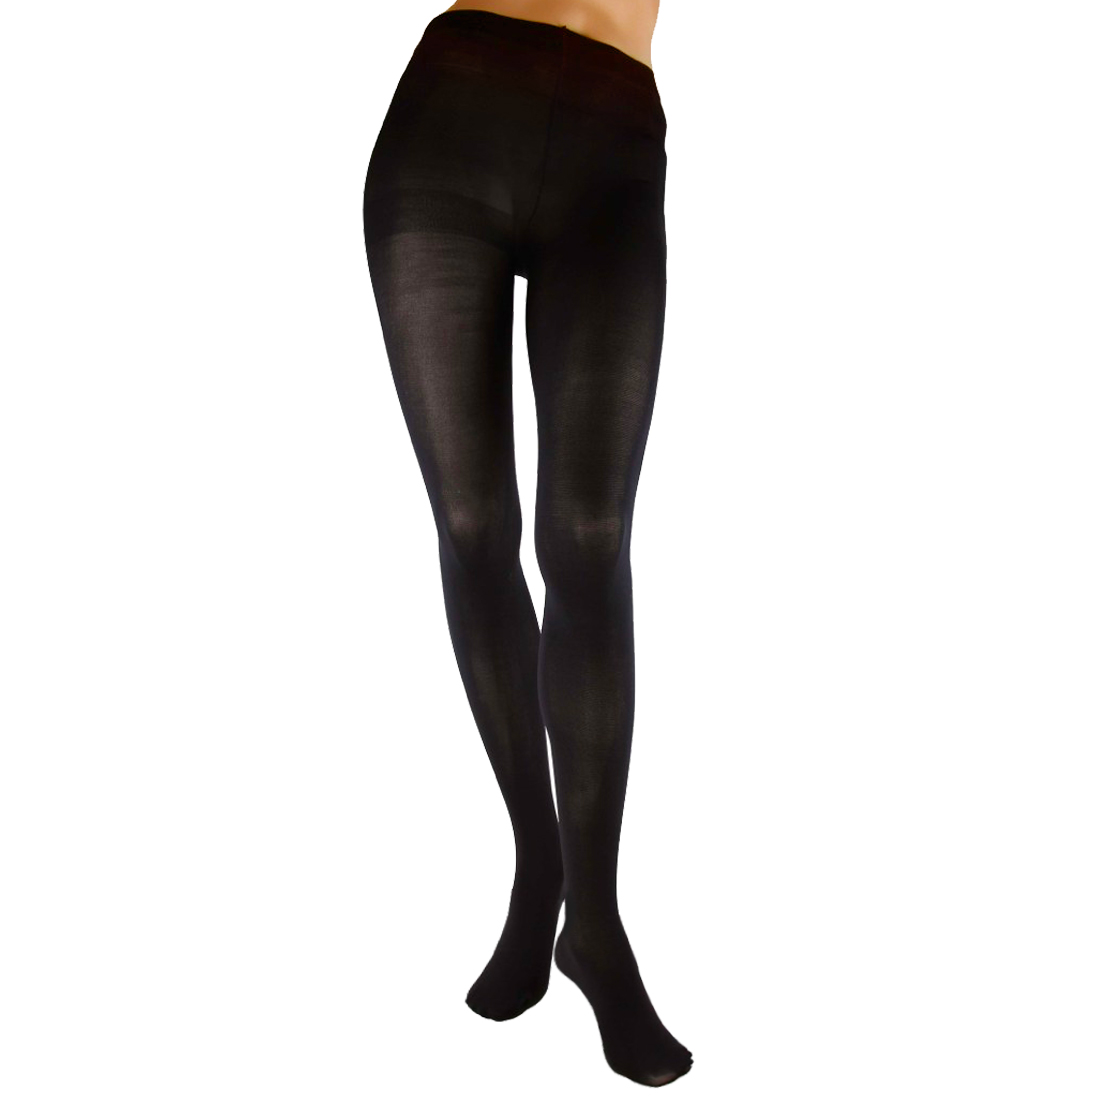 Ivory Microfiber Ankle Length Footless Tights Style# 1025